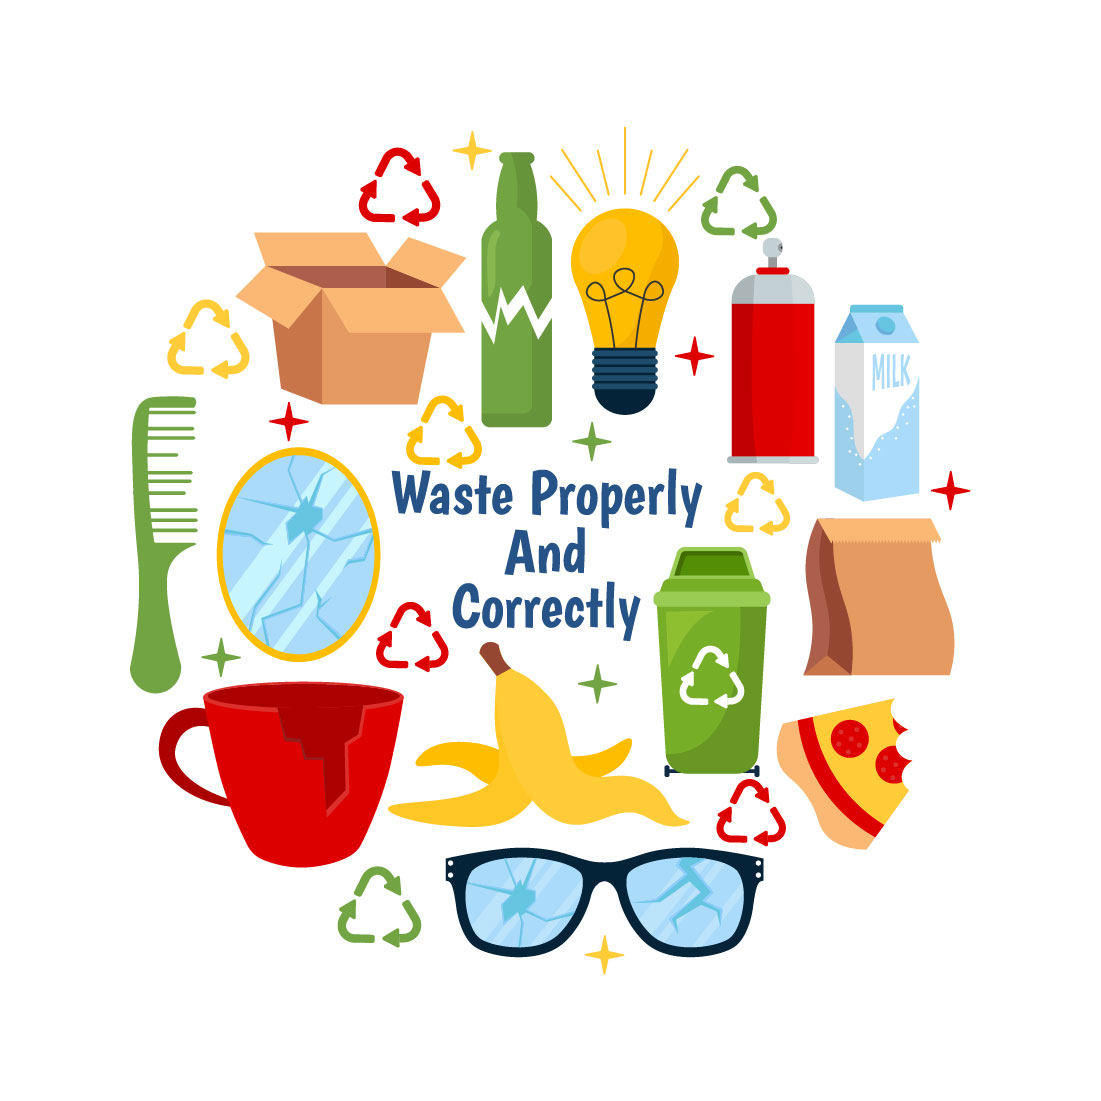 12 Waste Properly And Correctly Illustration preview image.